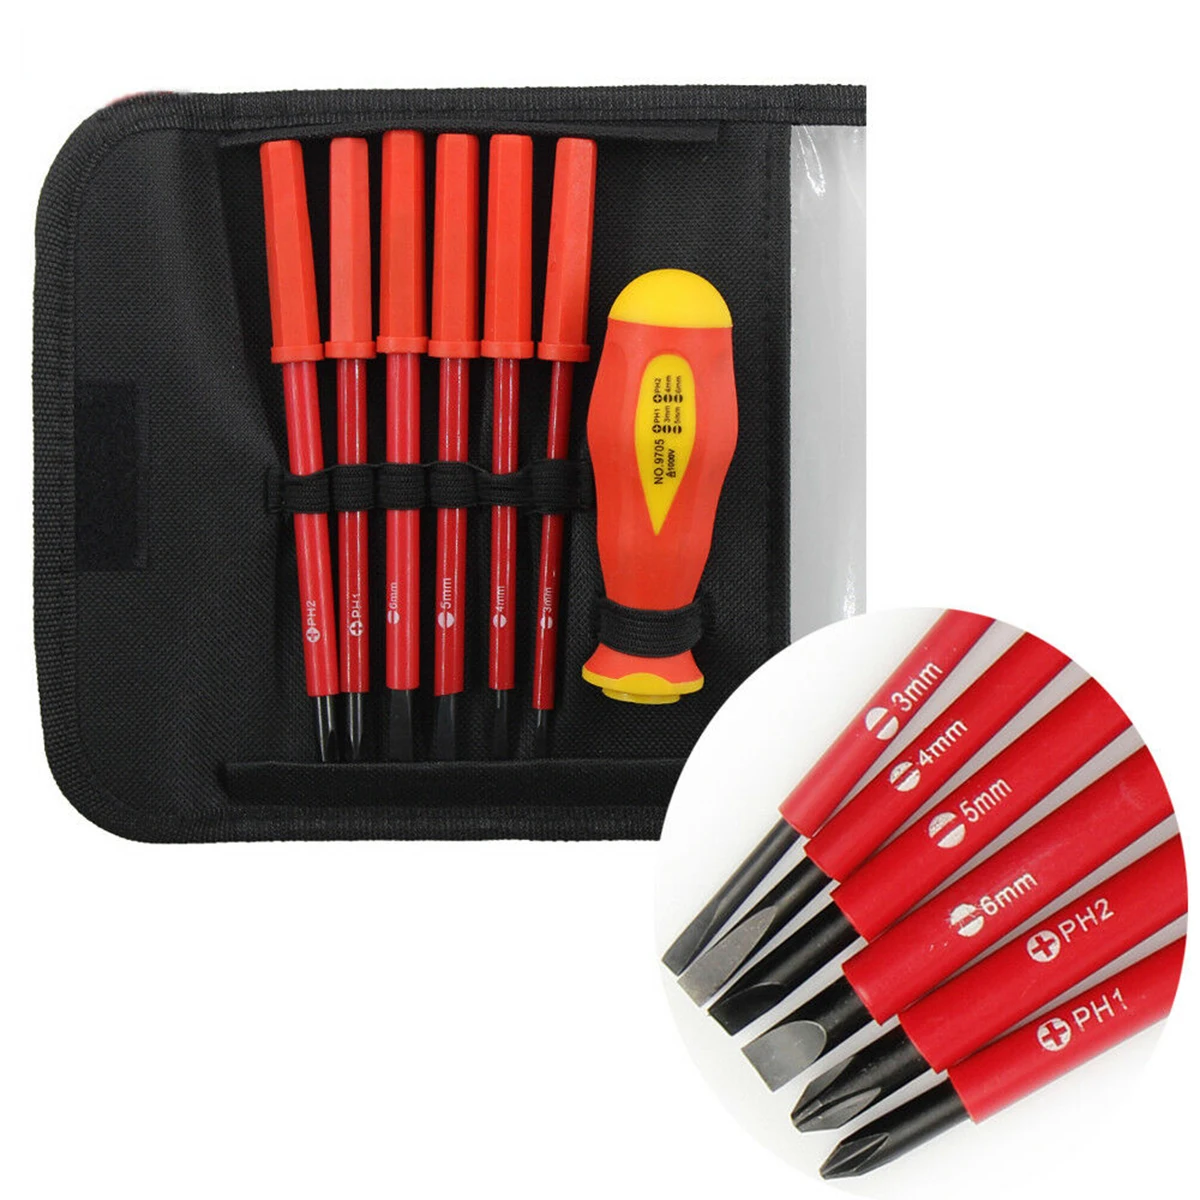 

7PCS Fully Insulated Withstand Voltage 1000V Interchangeable SL PH Electricians Screwdriver Multi-function Combination Tool Set